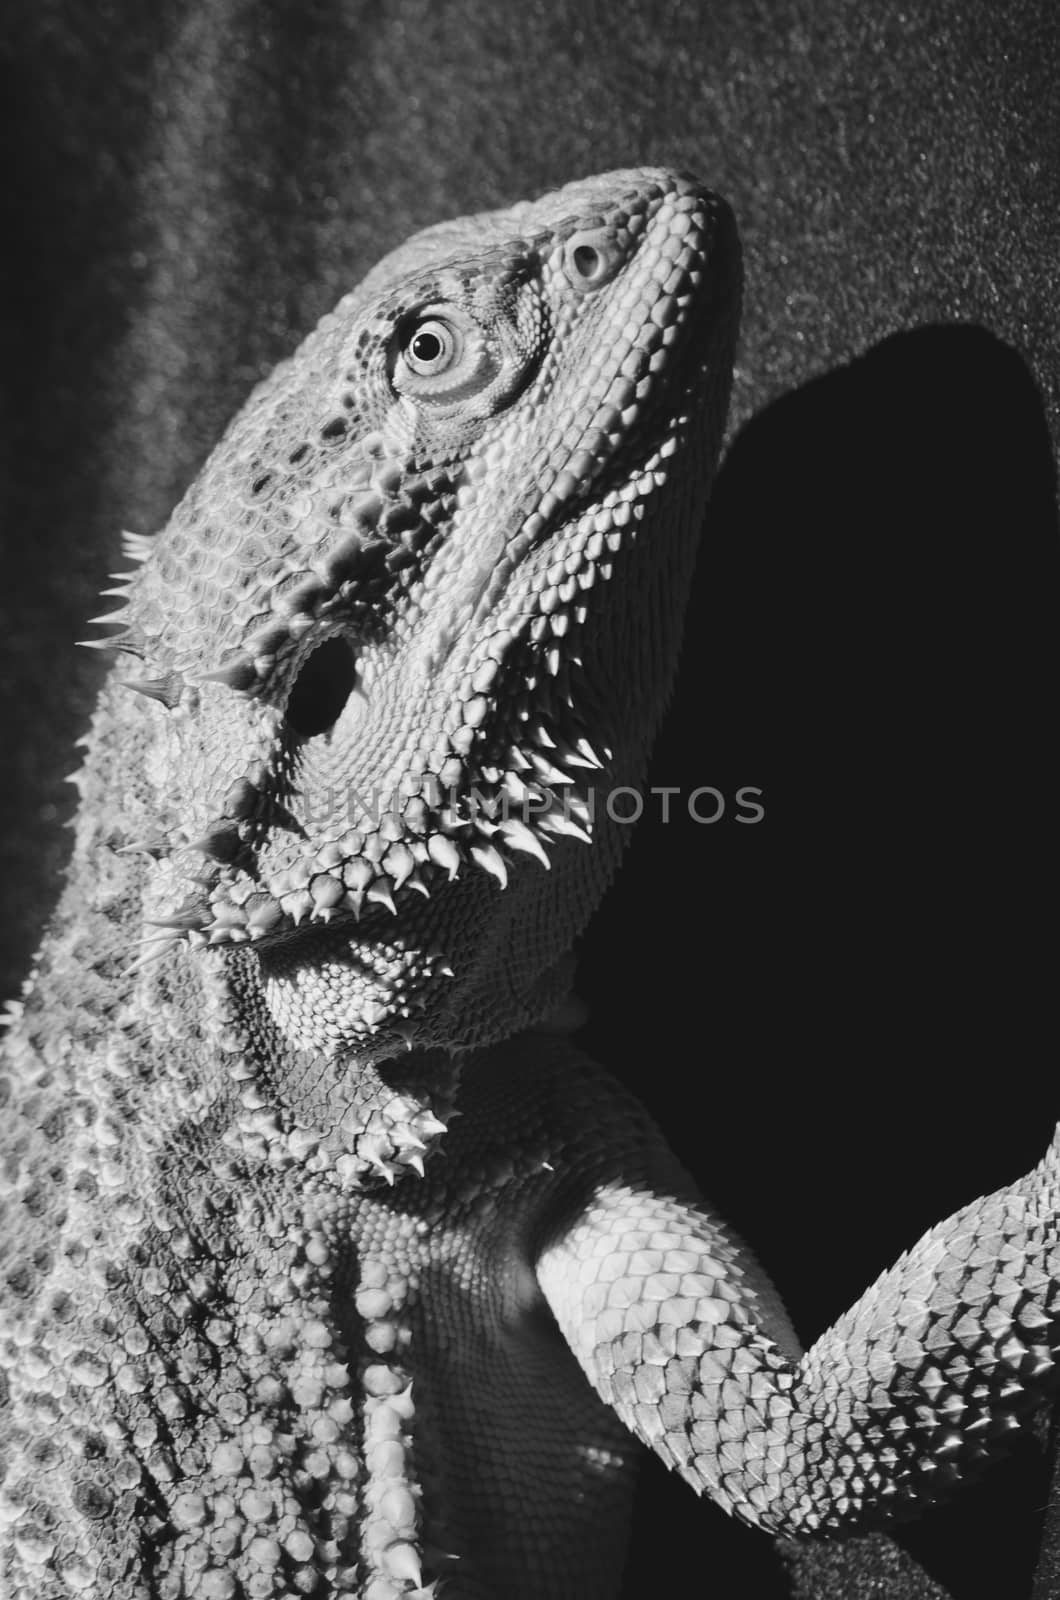 bearded dragon, reptile in the harsh sun, black and white